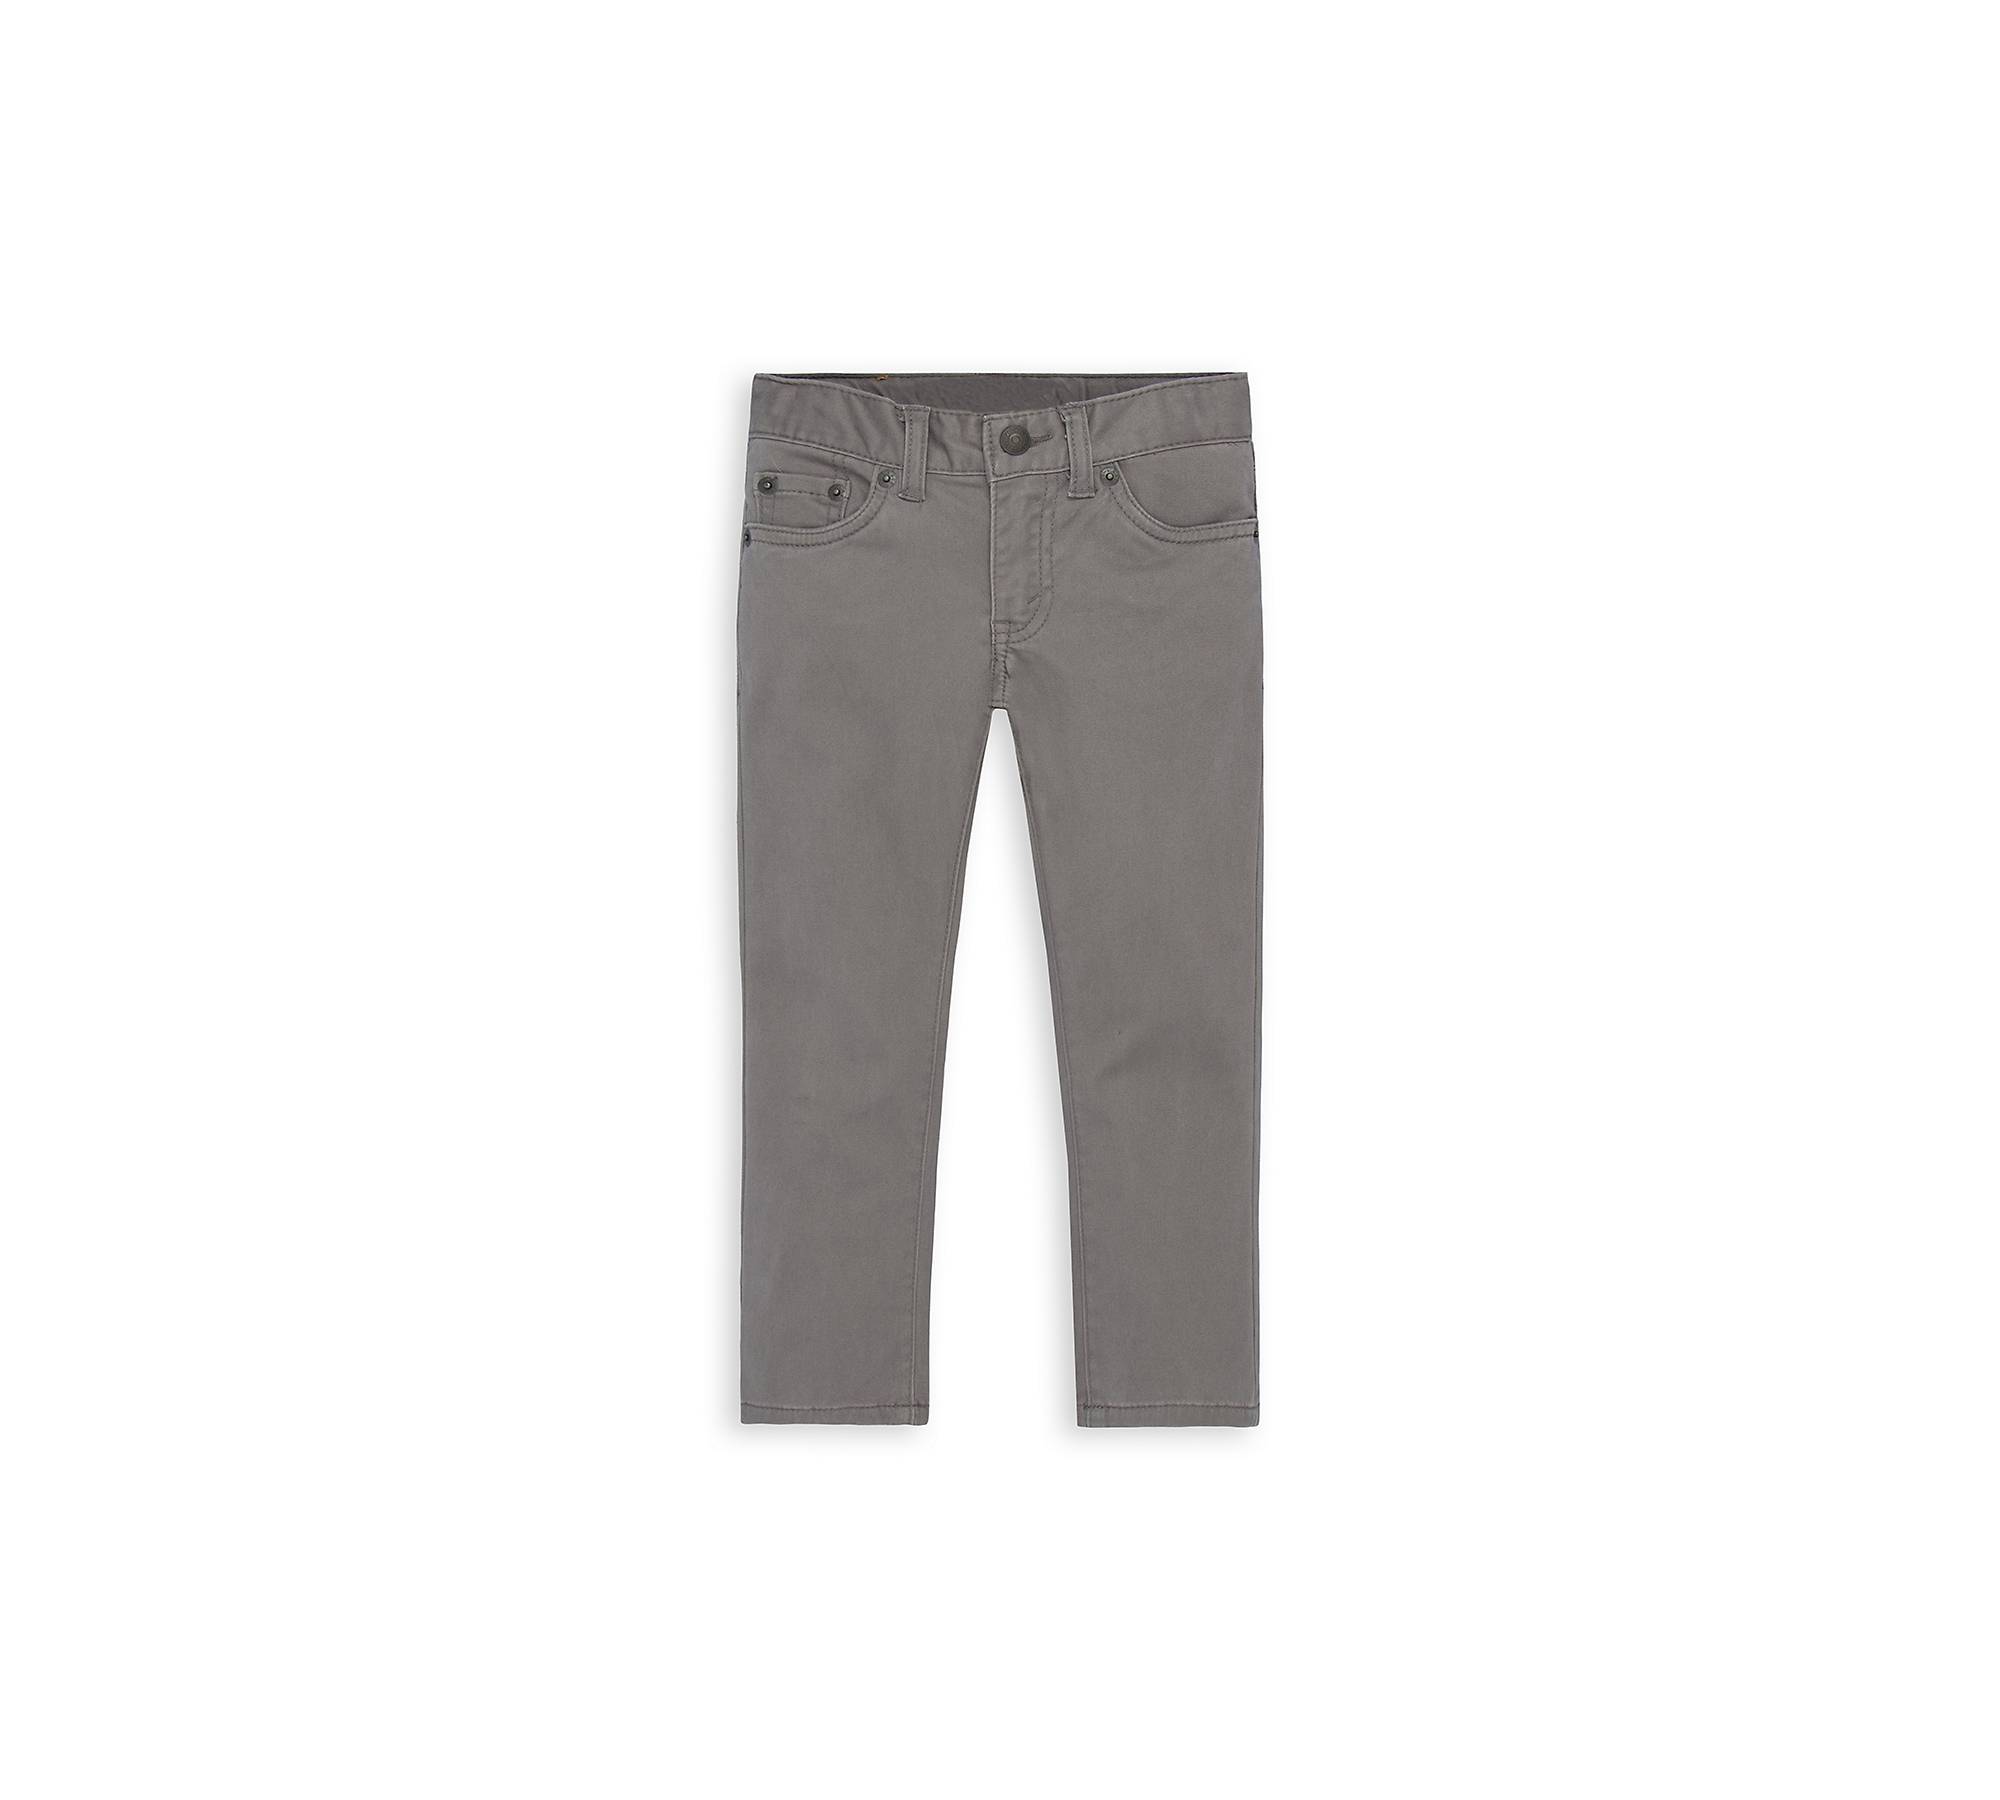 511™ Slim Fit Sueded Toddler Boys Pants 2t-4t - Grey | Levi's® US